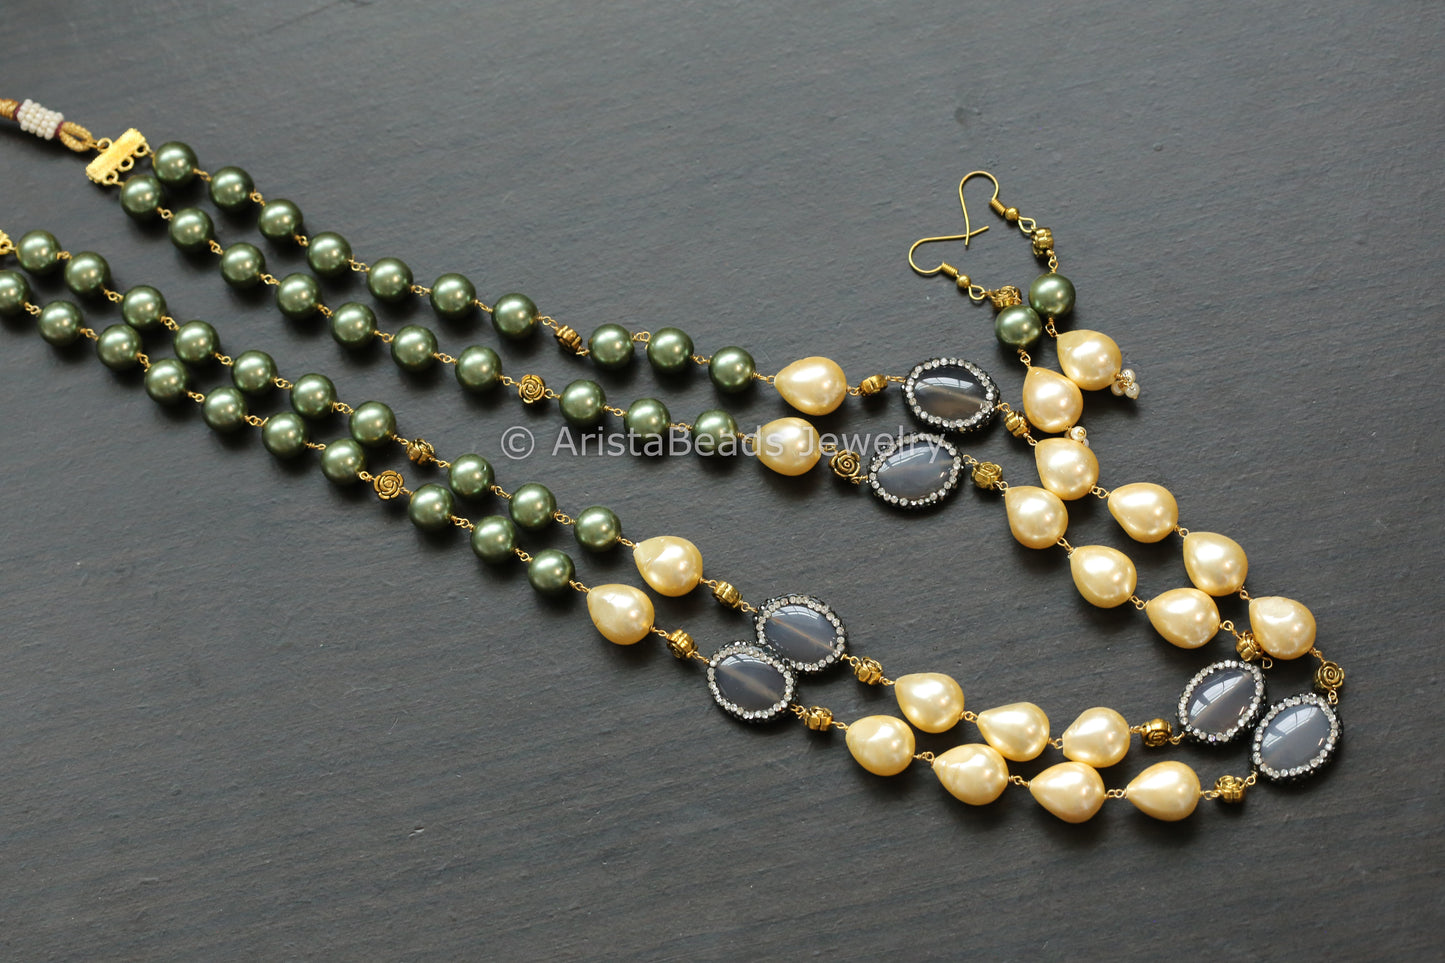 Green Pearls & Oxidized Beads Necklace